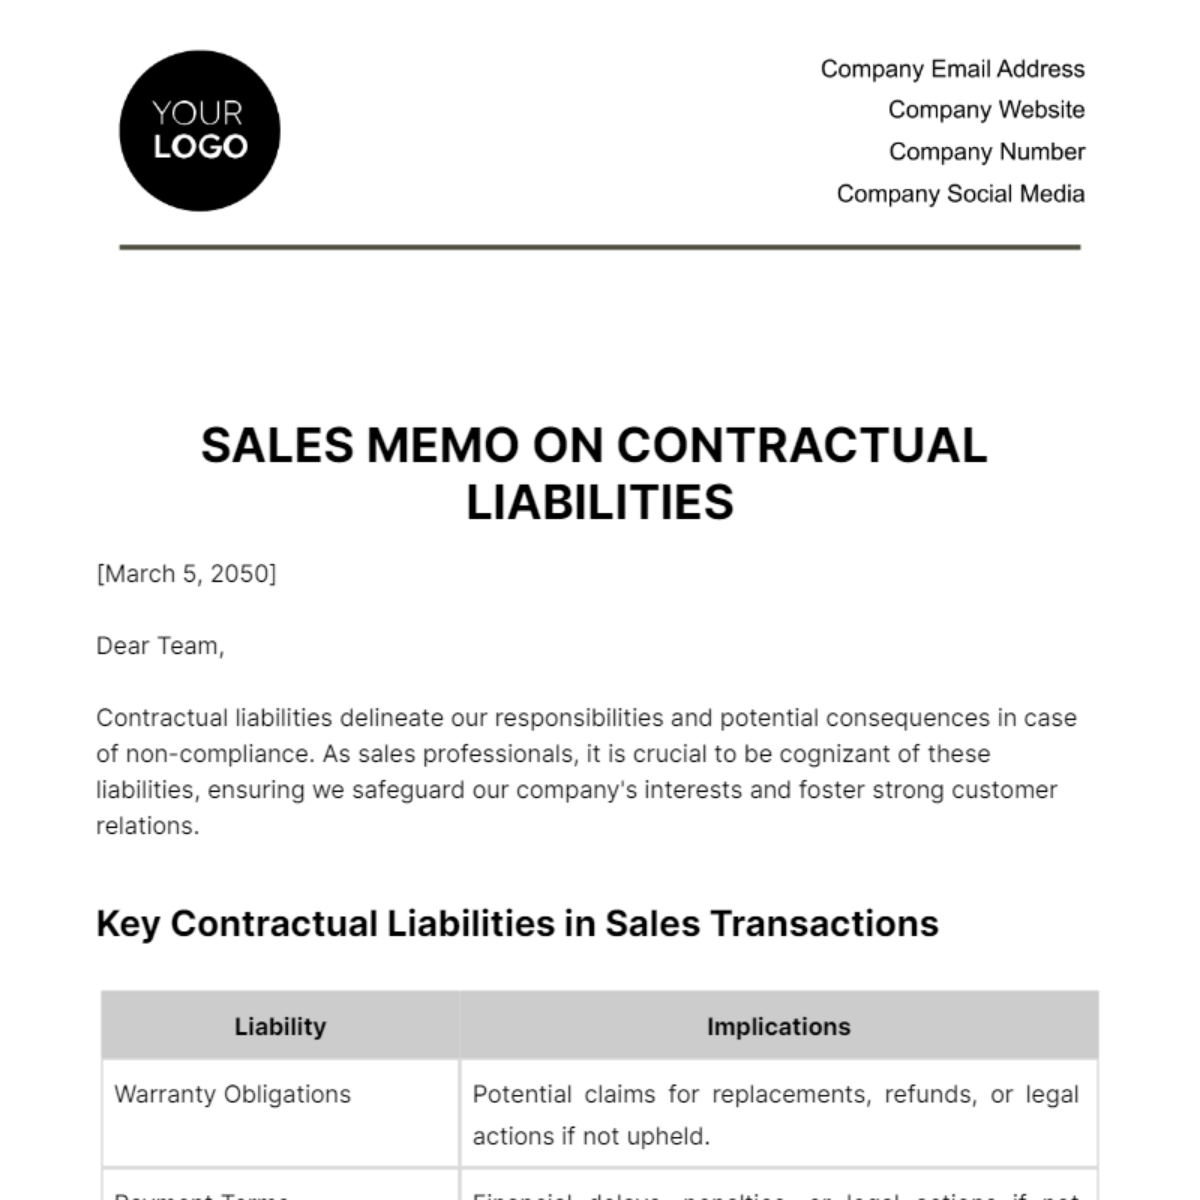 Free Sales Memo on Contractual Liabilities Template